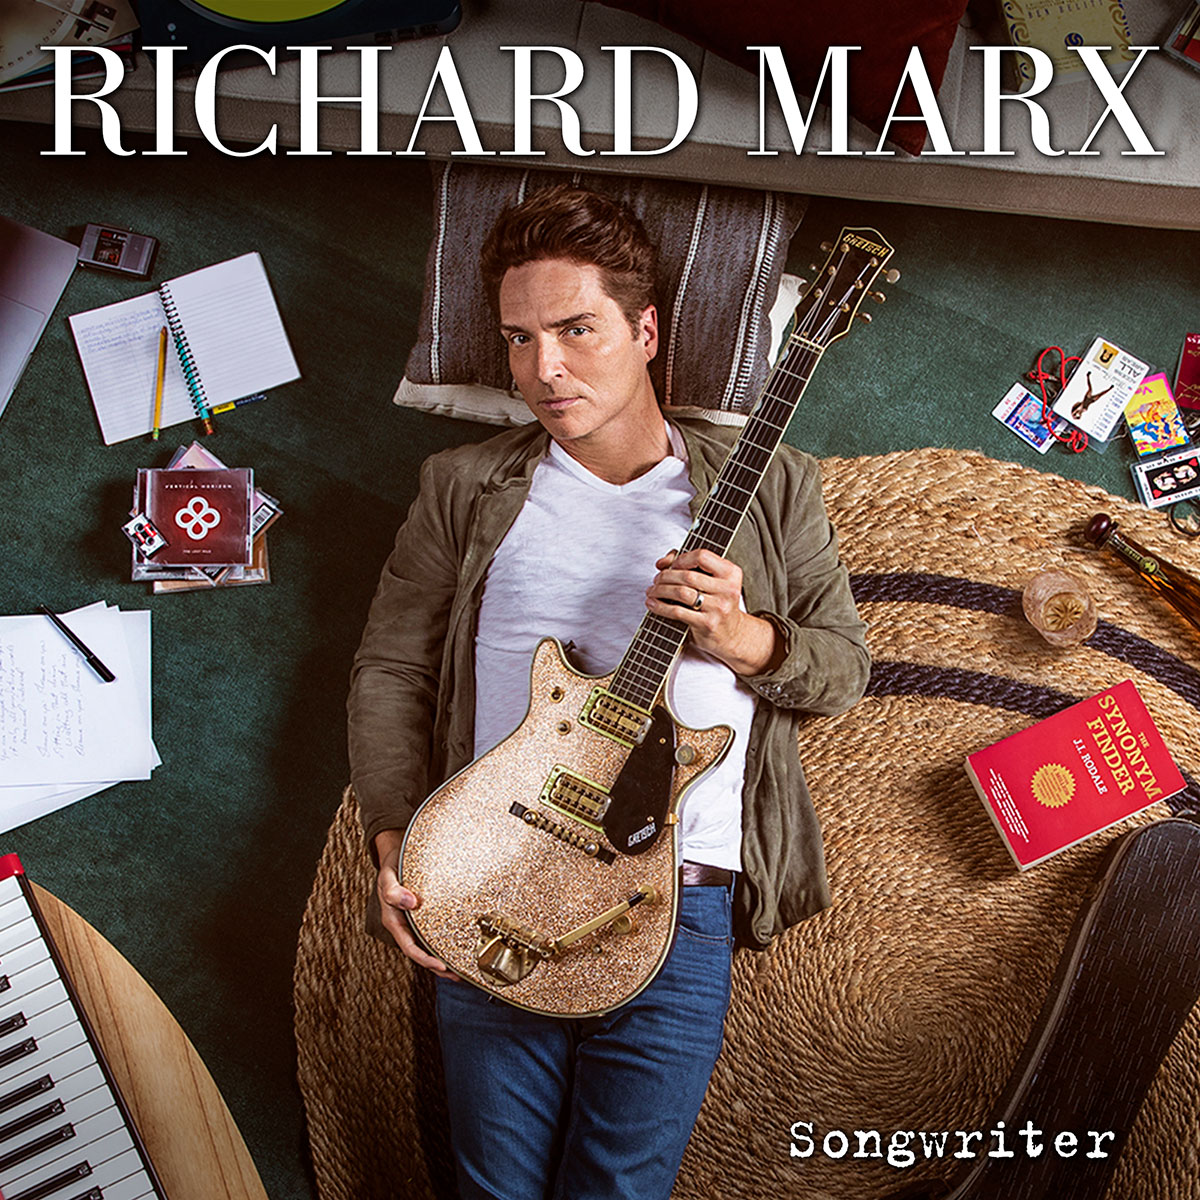 Listen To New Richard Marx Song "Shame On You" From Upcoming New Album "Songwriter"